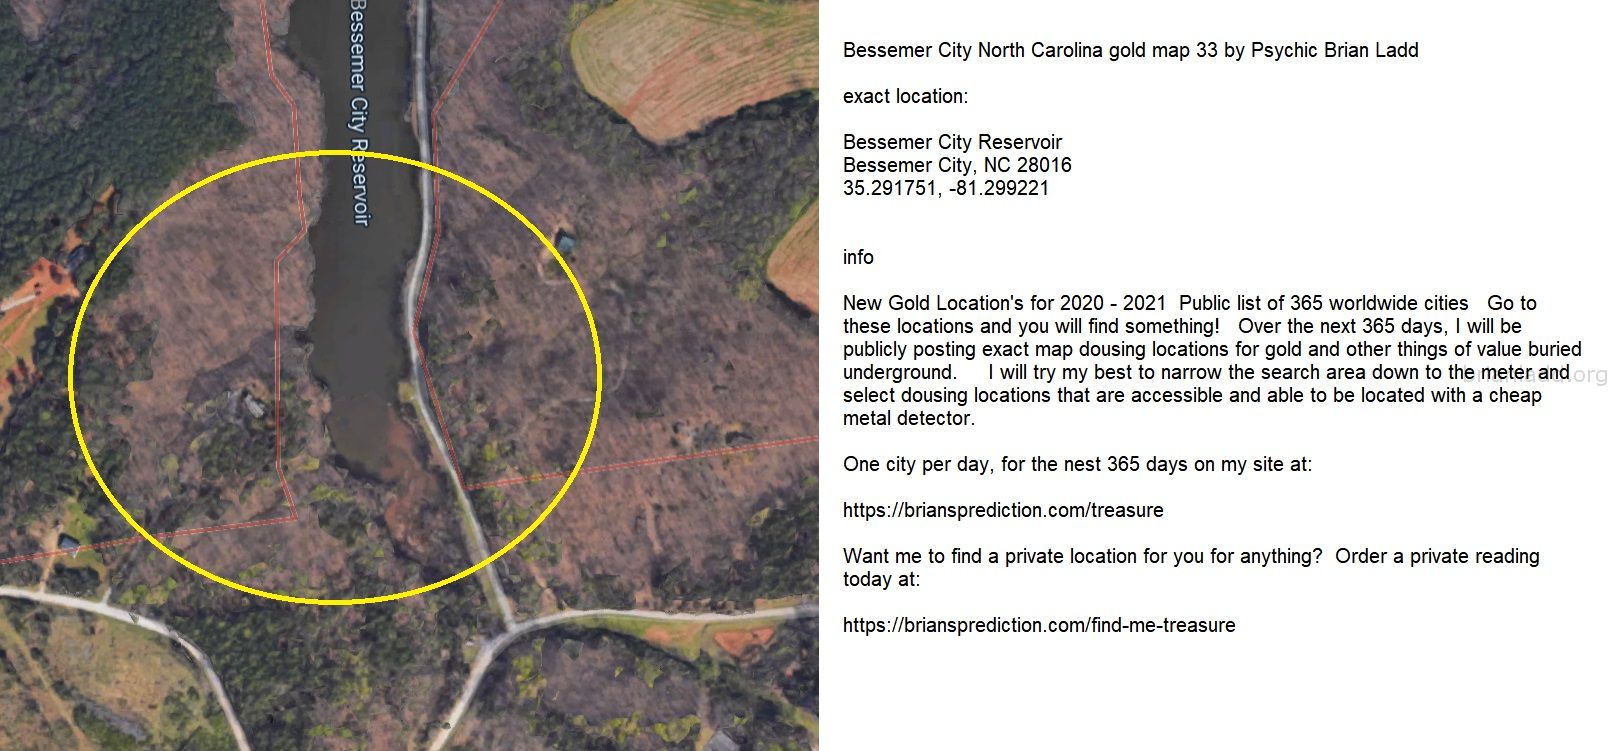 Bessemer City North Carolina Gold Map 33 By Psychic Brian Ladd - Bessemer City North Carolina Gold Map 33 By Psychic Bri...
Bessemer City North Carolina Gold Map 33 By Psychic Brian Ladd  Exact Location:  Bessemer City Reservoir  Bessemer City, Nc 28016  35.291751, -81.299221  Info  New Gold Location'S For 2020 - 2021  Public List Of 365 Worldwide Cities  Go To These Locations And You Will Find Something!  Over The Next 365 Days, I Will Be Publicly Posting Exact Map Dousing Locations For Gold And Other Things Of Value Buried Underground.  I Will Try My Best To Narrow The Search Area Down To The Meter And Select Dousing Locations That Are Accessible And Able To Be Located With A Cheap Metal Detector.  One City Per Day, For The Nest 365 Days On My Site At:   https://briansprediction.com/Treasure  Want Me To Find A Private Location For You For Anything?  Order A Private Reading Today At:   https://briansprediction.com/Find-Me-Treasure
